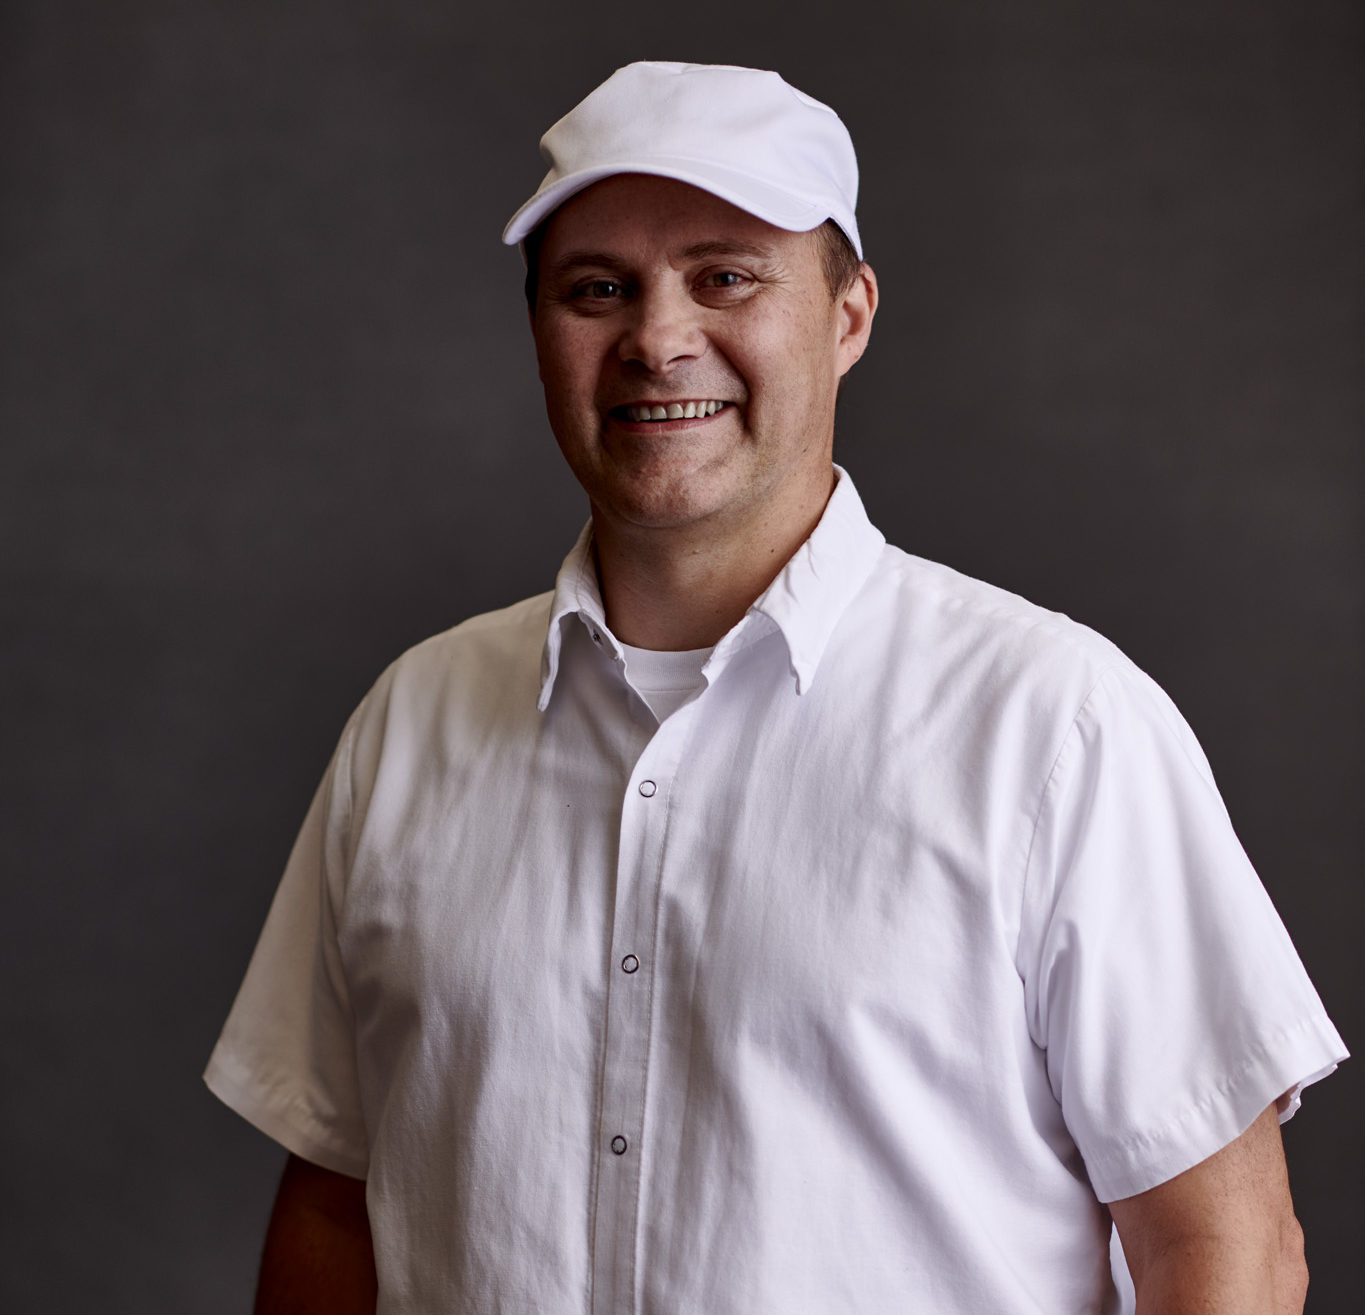 cheesemakers about us chris renard profile